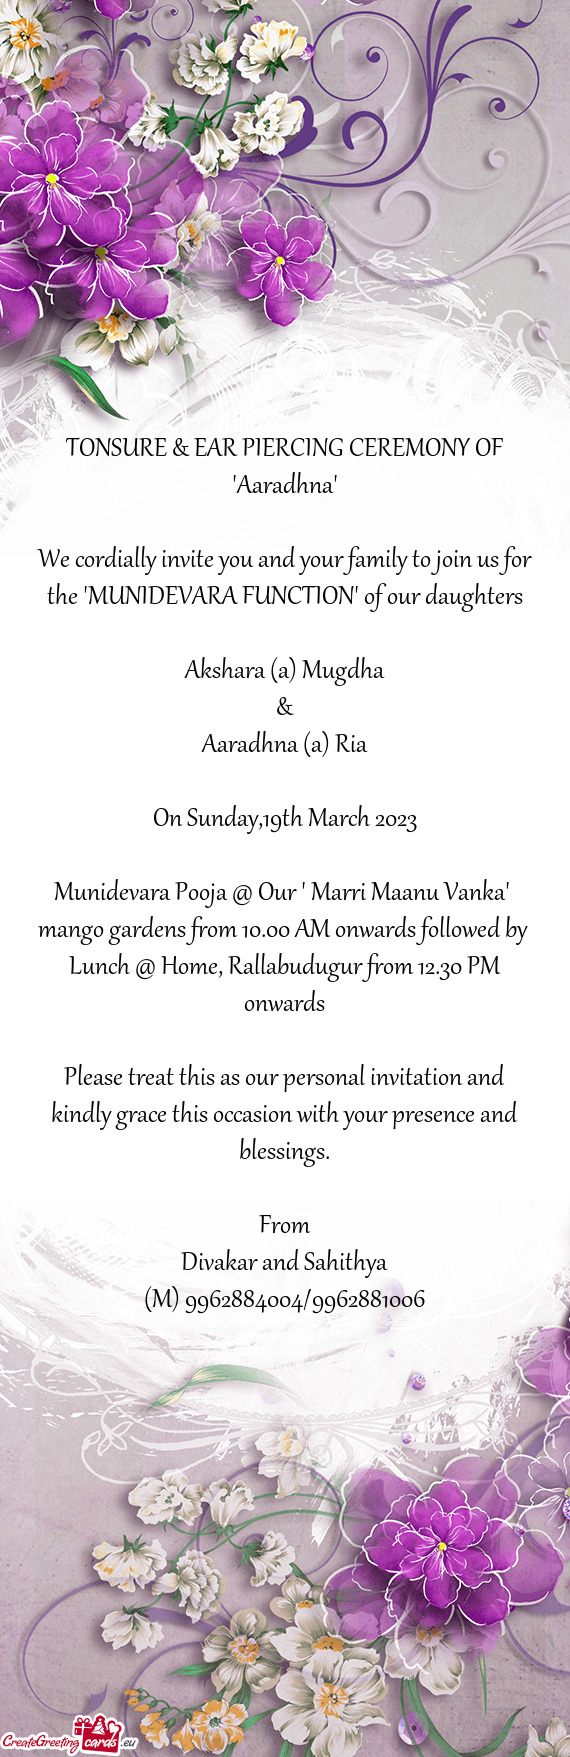 We cordially invite you and your family to join us for the "MUNIDEVARA FUNCTION" of our daughters